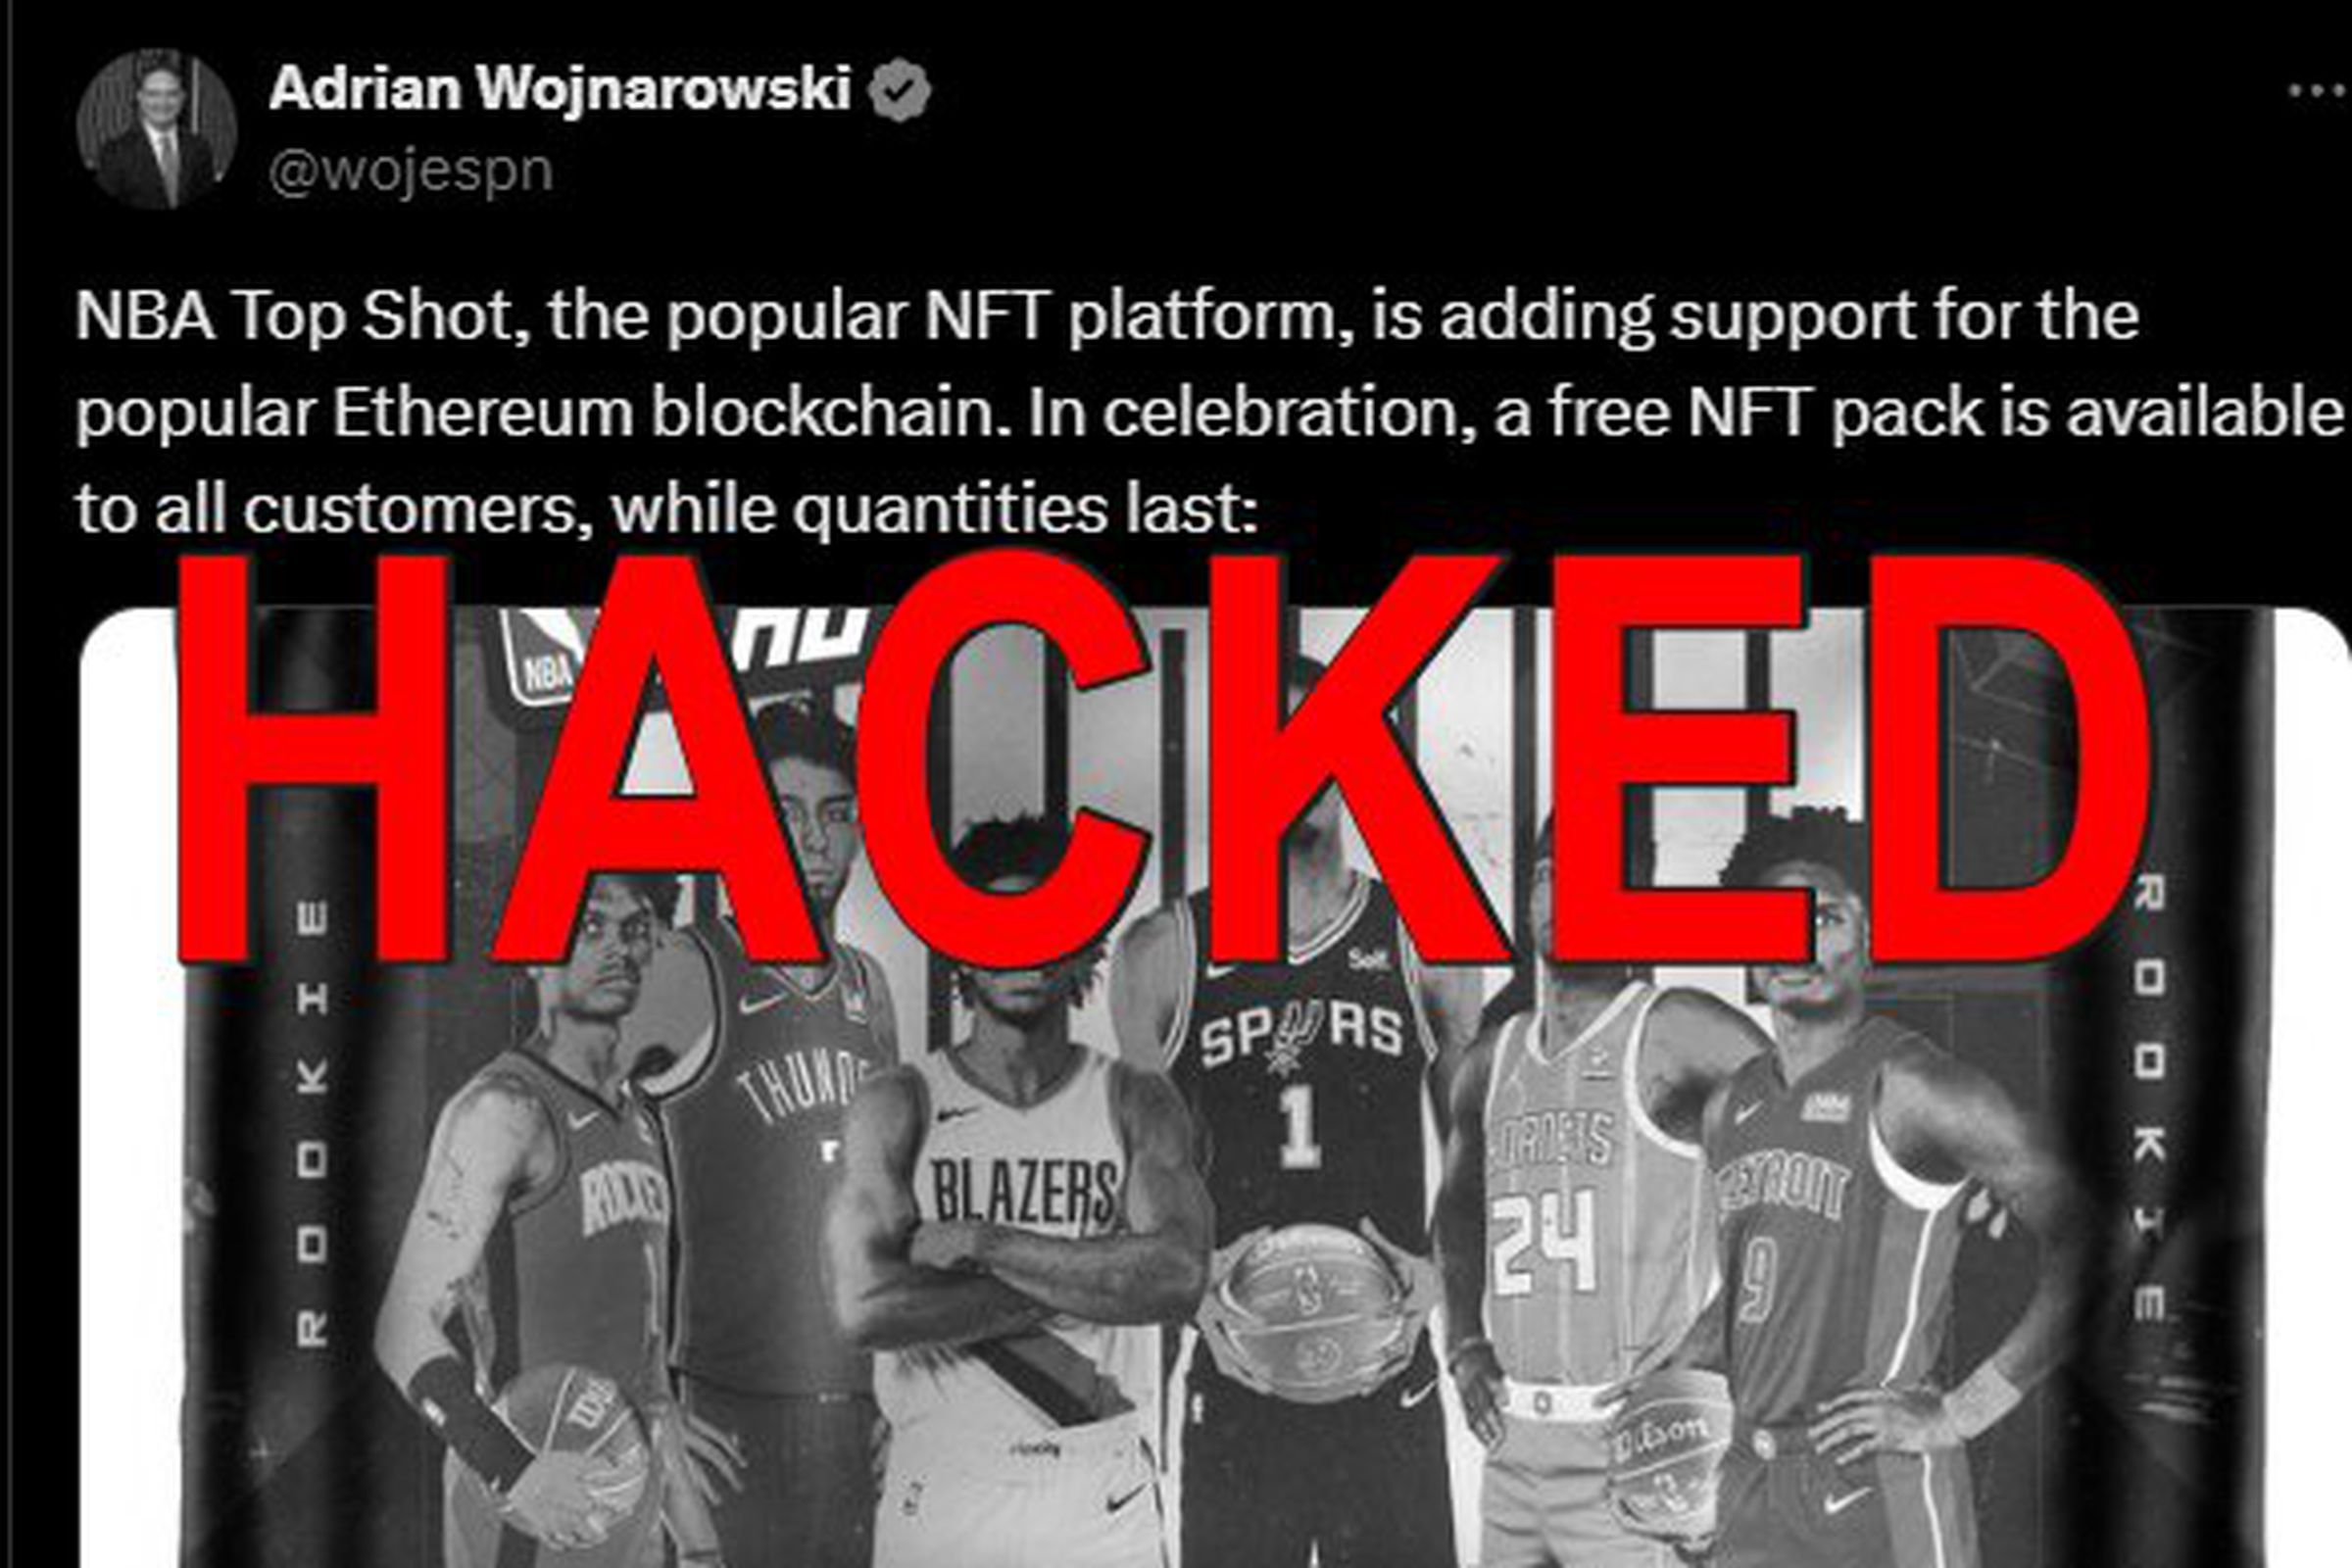 A greyscale image of the fake tweet, with the word “hacked” across it in red text.